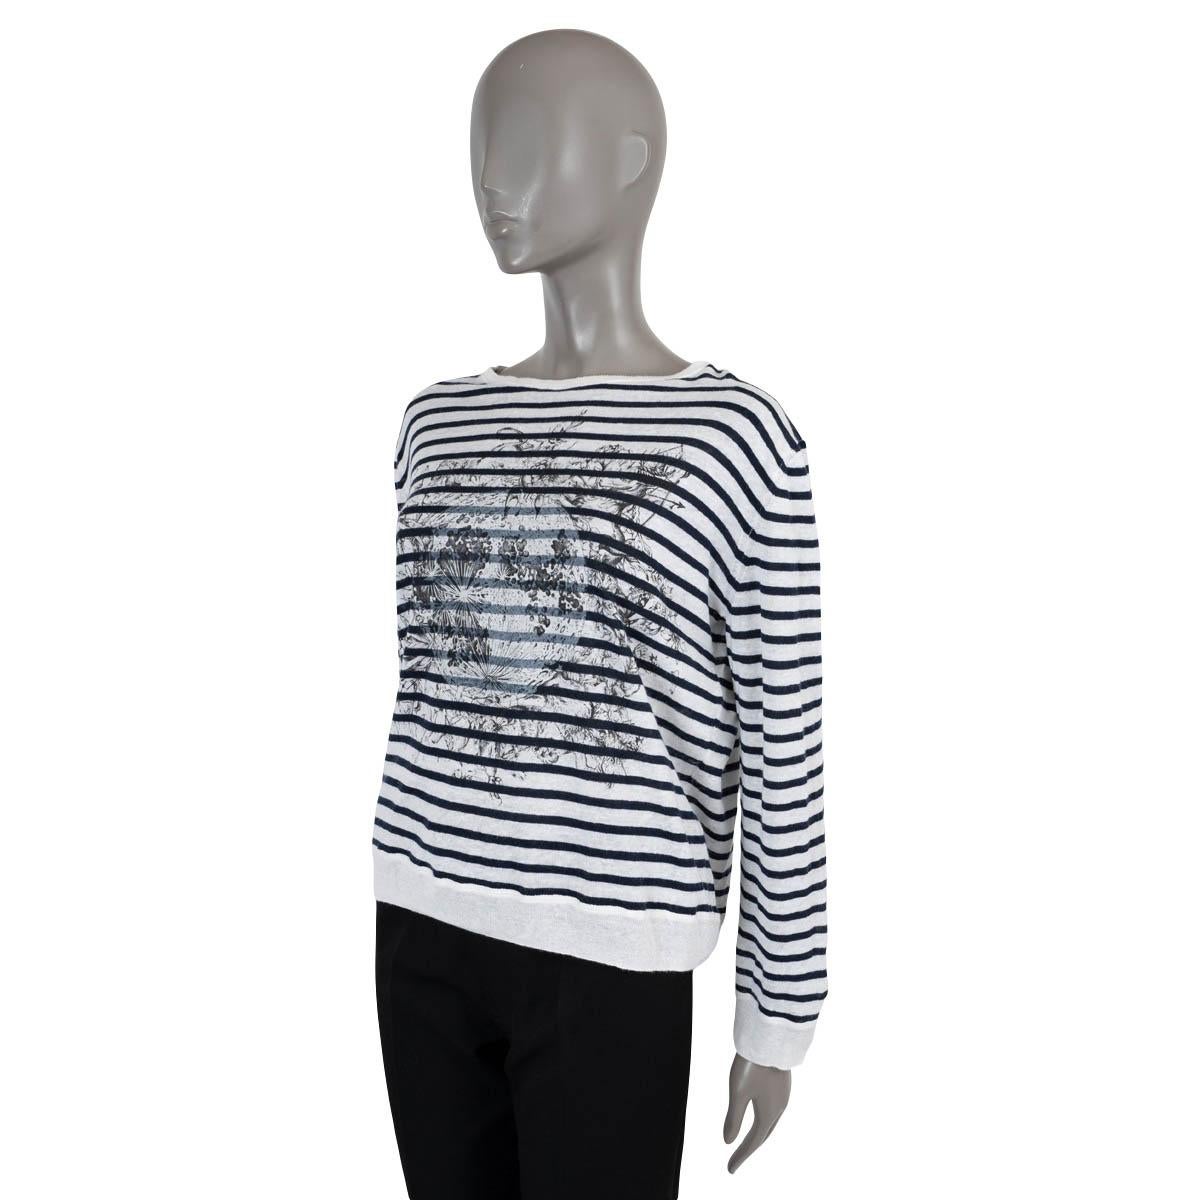 100% authentic Christian Dior Chez Moi striped sweater in white, grey and navy blue linen (75%), cashmere (18%) and silk (7%). The design features a printed globe and flowers motif at front and a boat neck. Has been worn and is in excellent